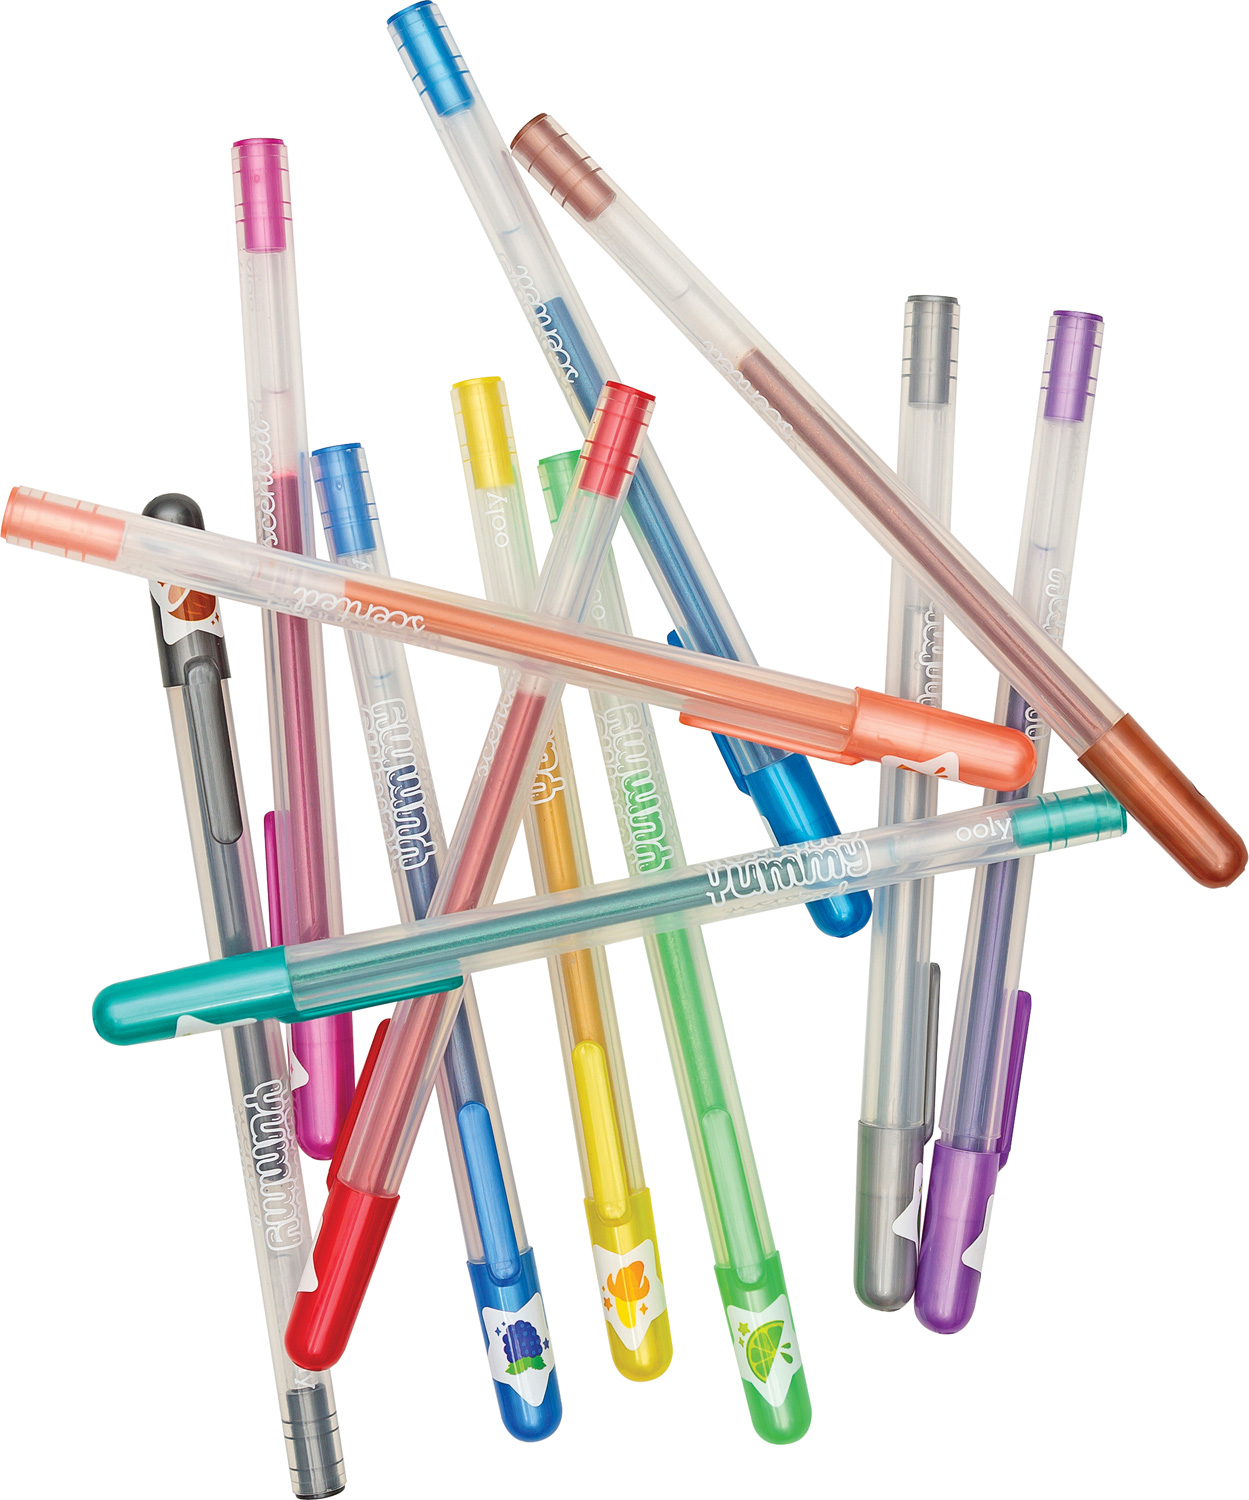 Yummy Yummy Scented Gel Pens Set of 12 - Tip Toes